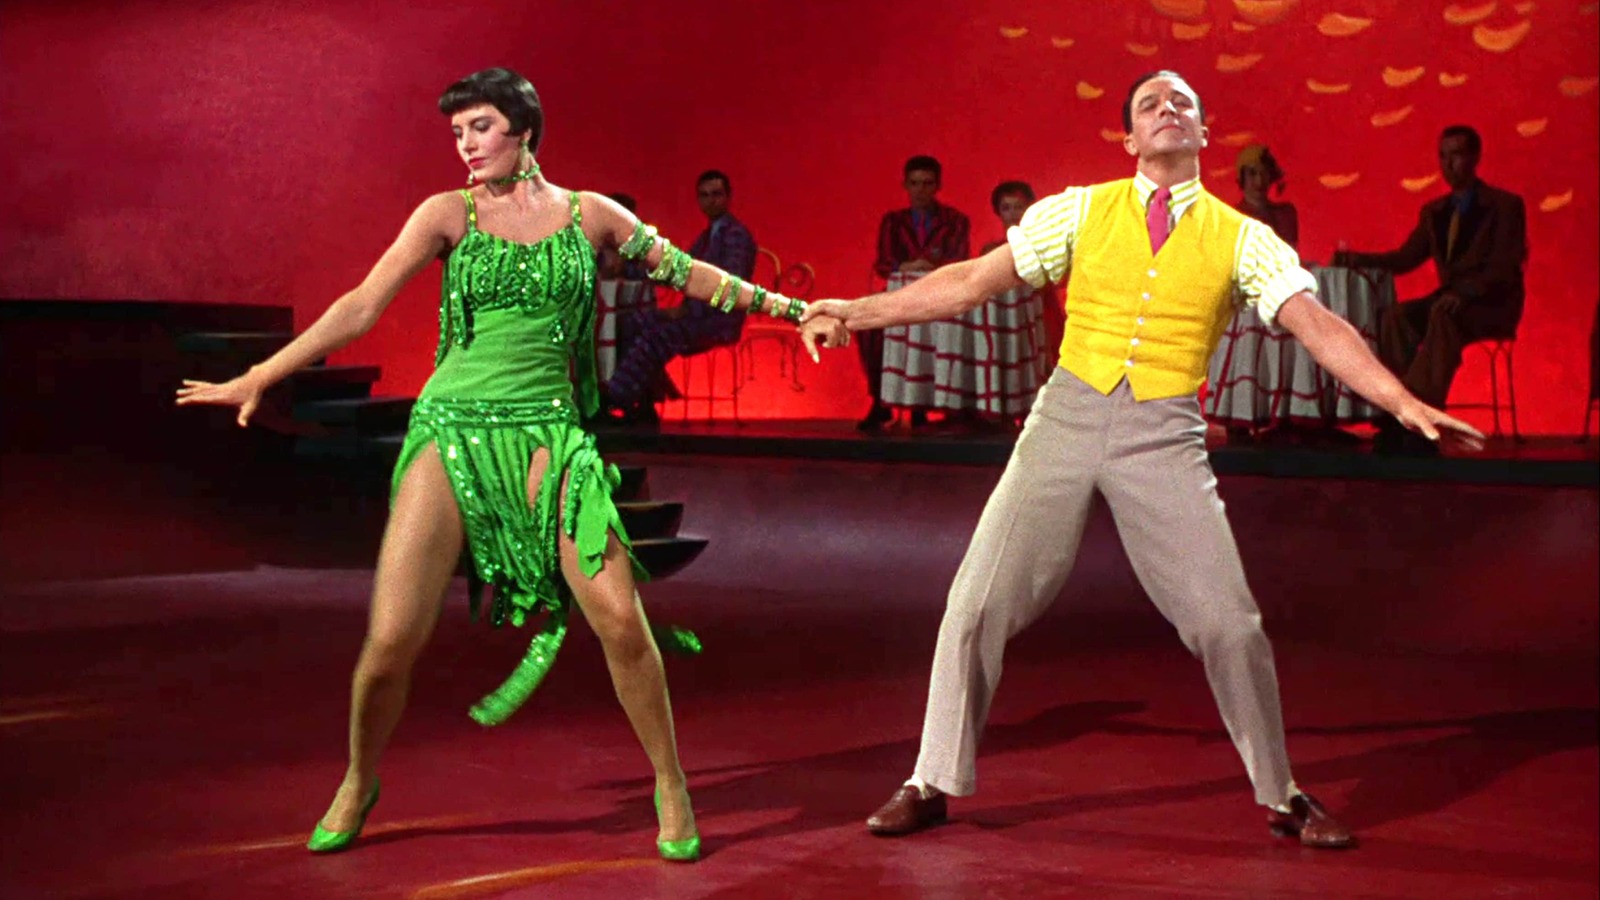 Shooting In Color Caused Some Problems Behind The Scenes Of Singin’ In The Rain